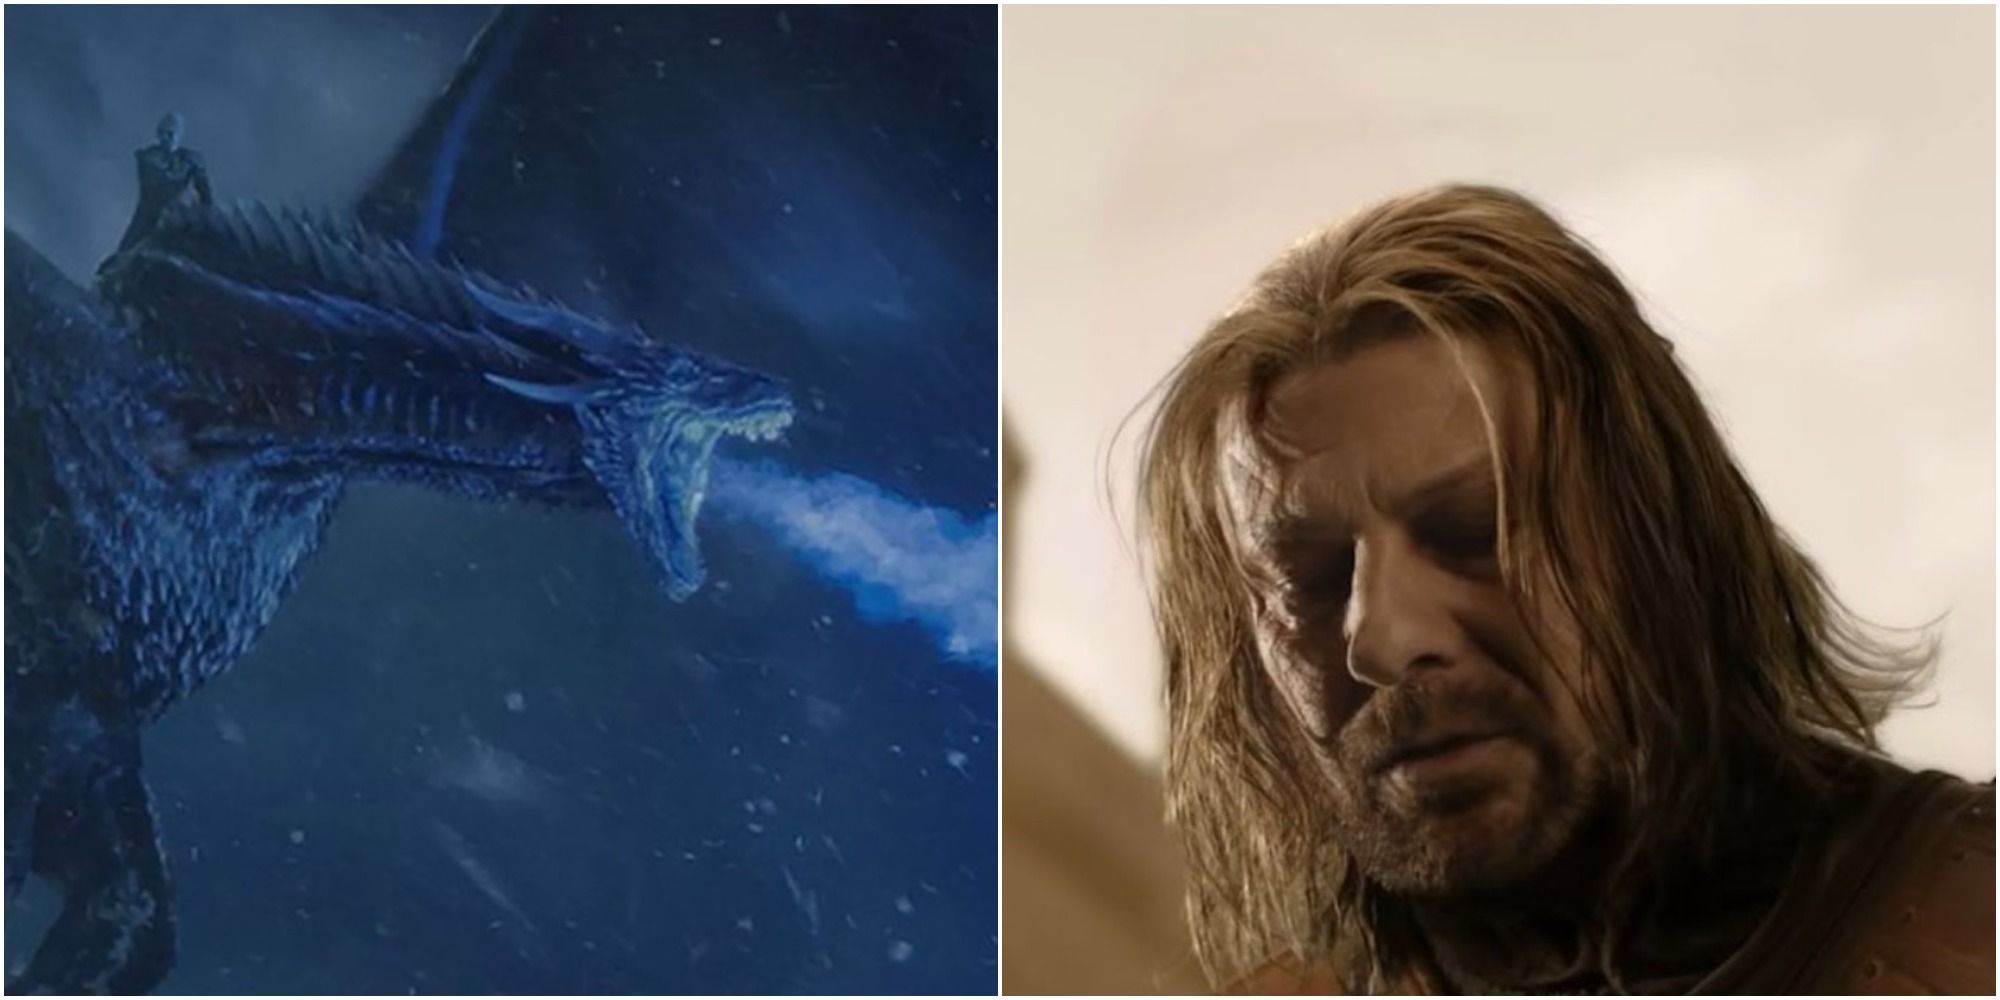 Split Image showing the Night King on Viserion and Ned Stark's execution